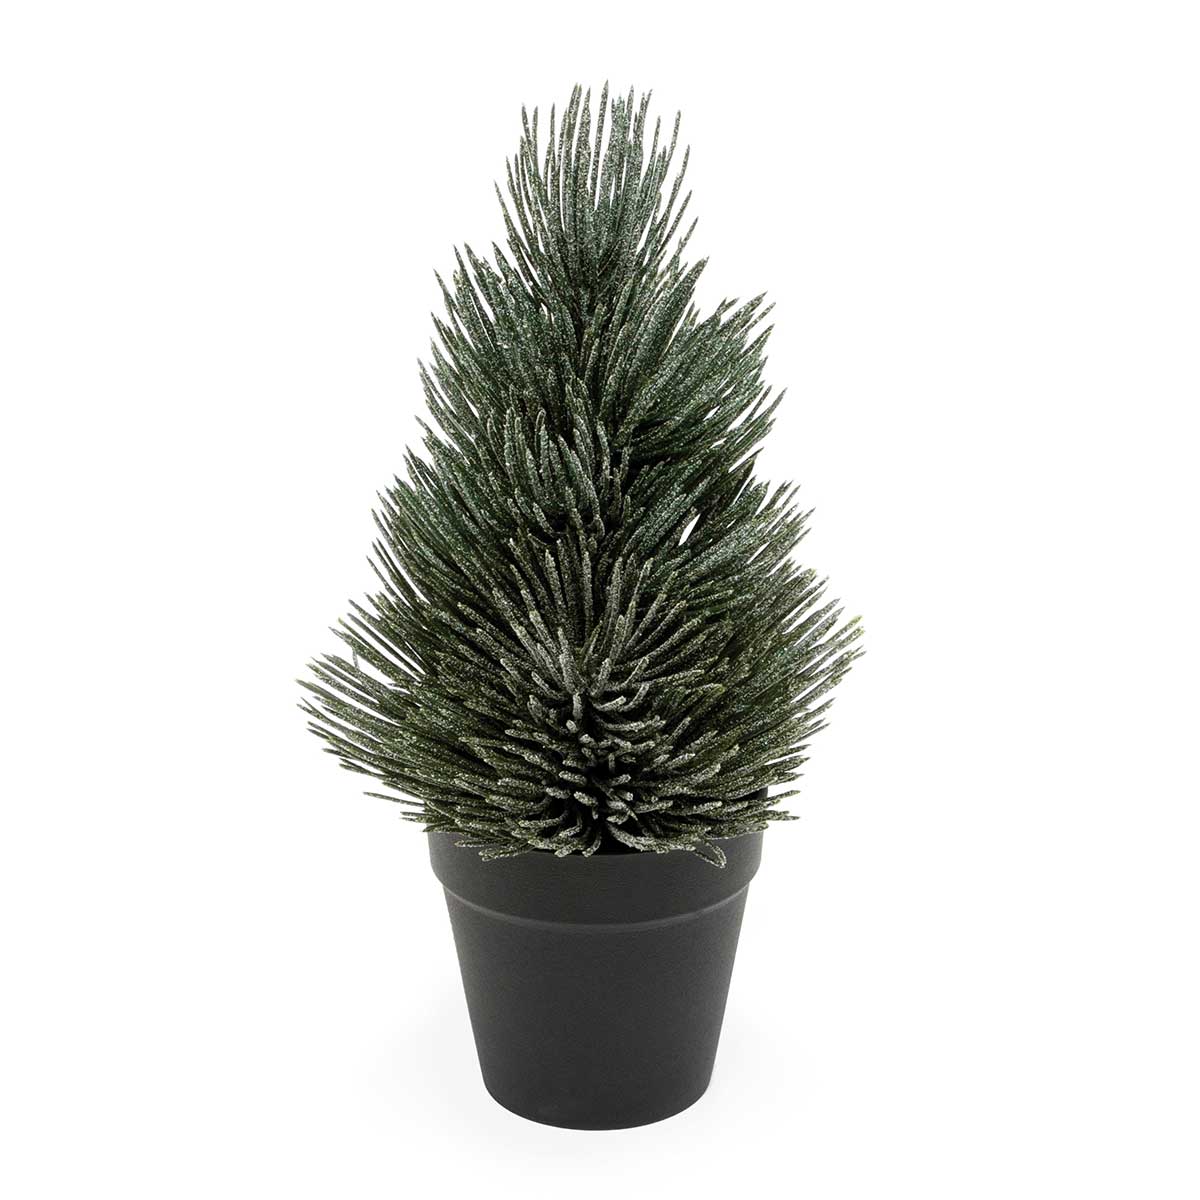 !FROSTED PINE TREE IN BLACK POT